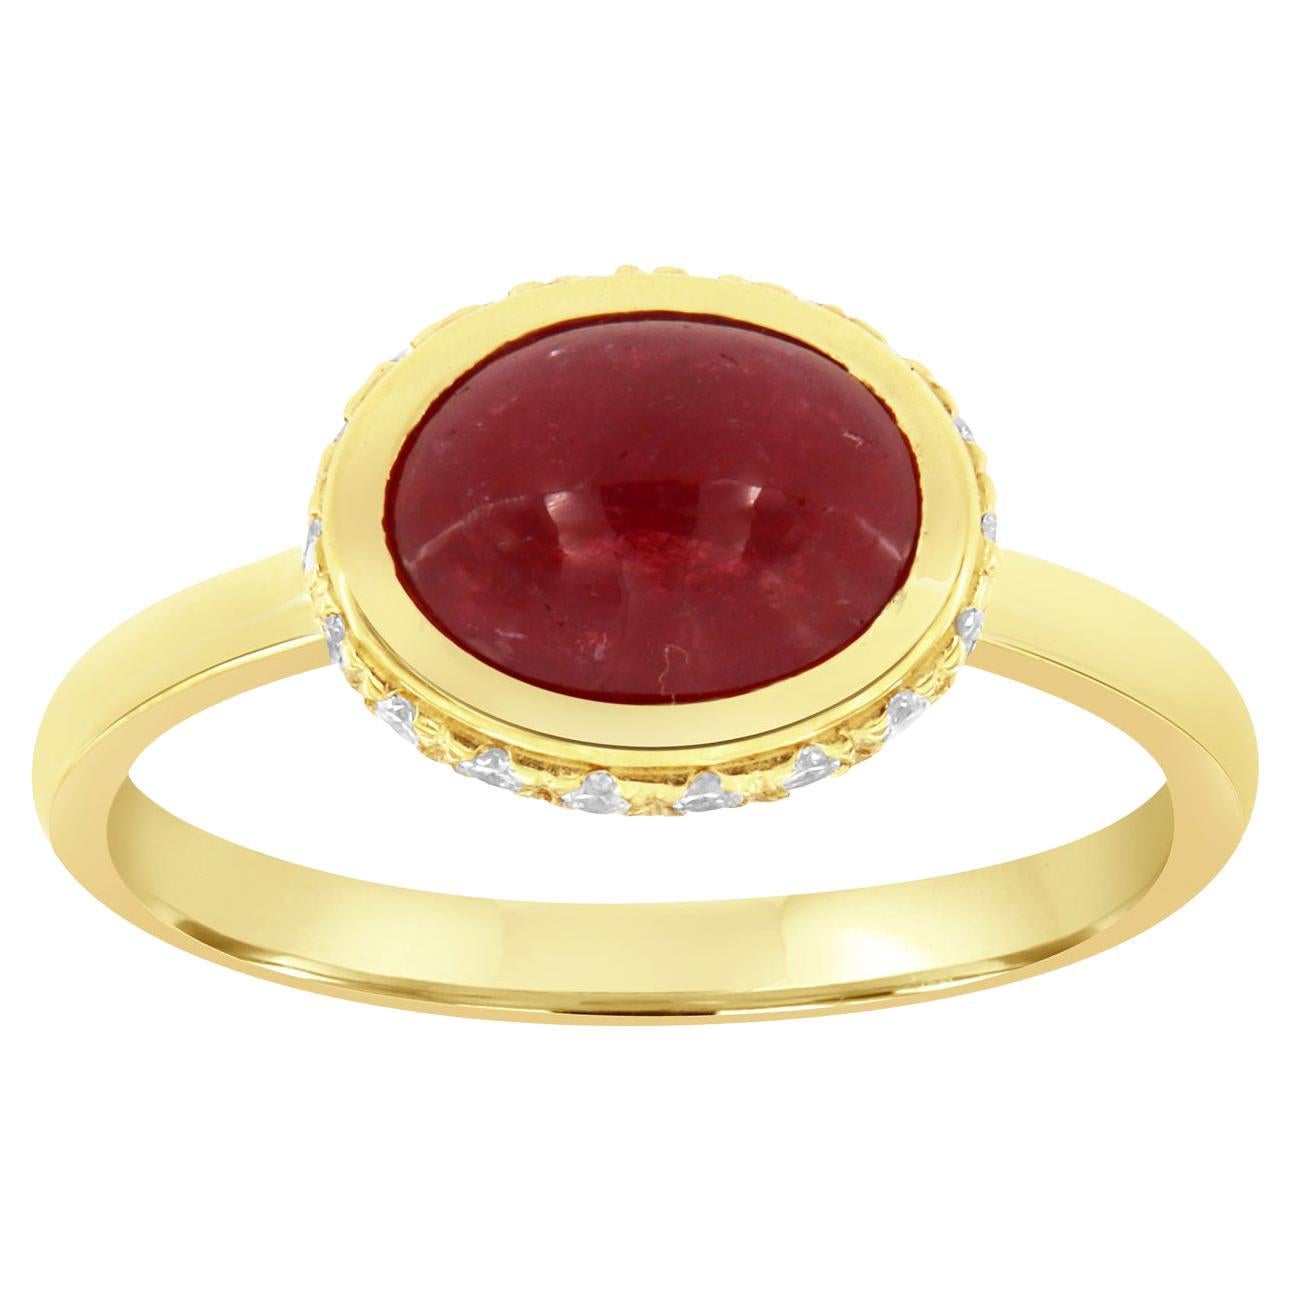 GIA Certified 2.56 Carat Cabochon Ruby & Diamond 18k Yellow Gold Ring For Sale